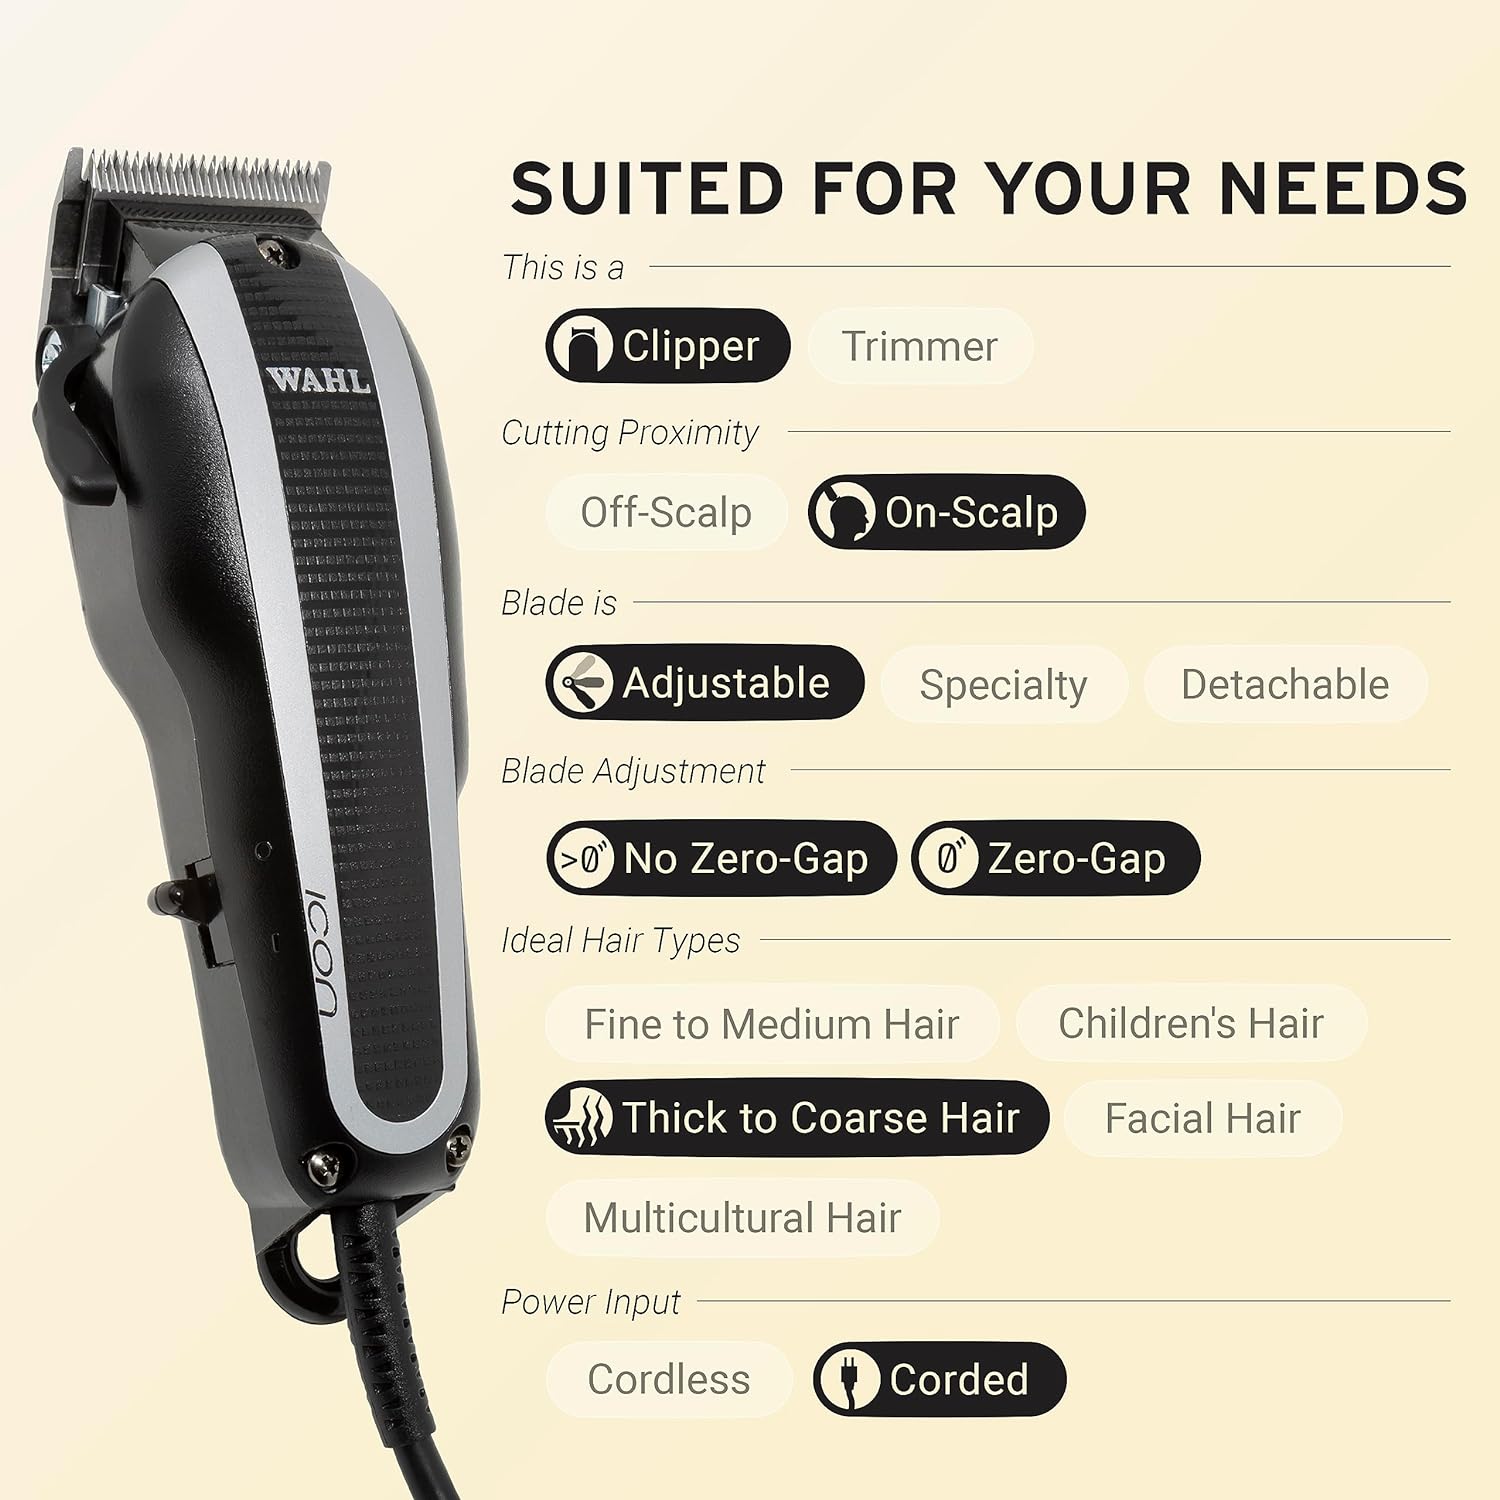 Wahl Professional Icon Clipper - Full Size With Ultra Powerful V9000 Motor for Professional Barbers and Stylists - Model 8490-900, Black